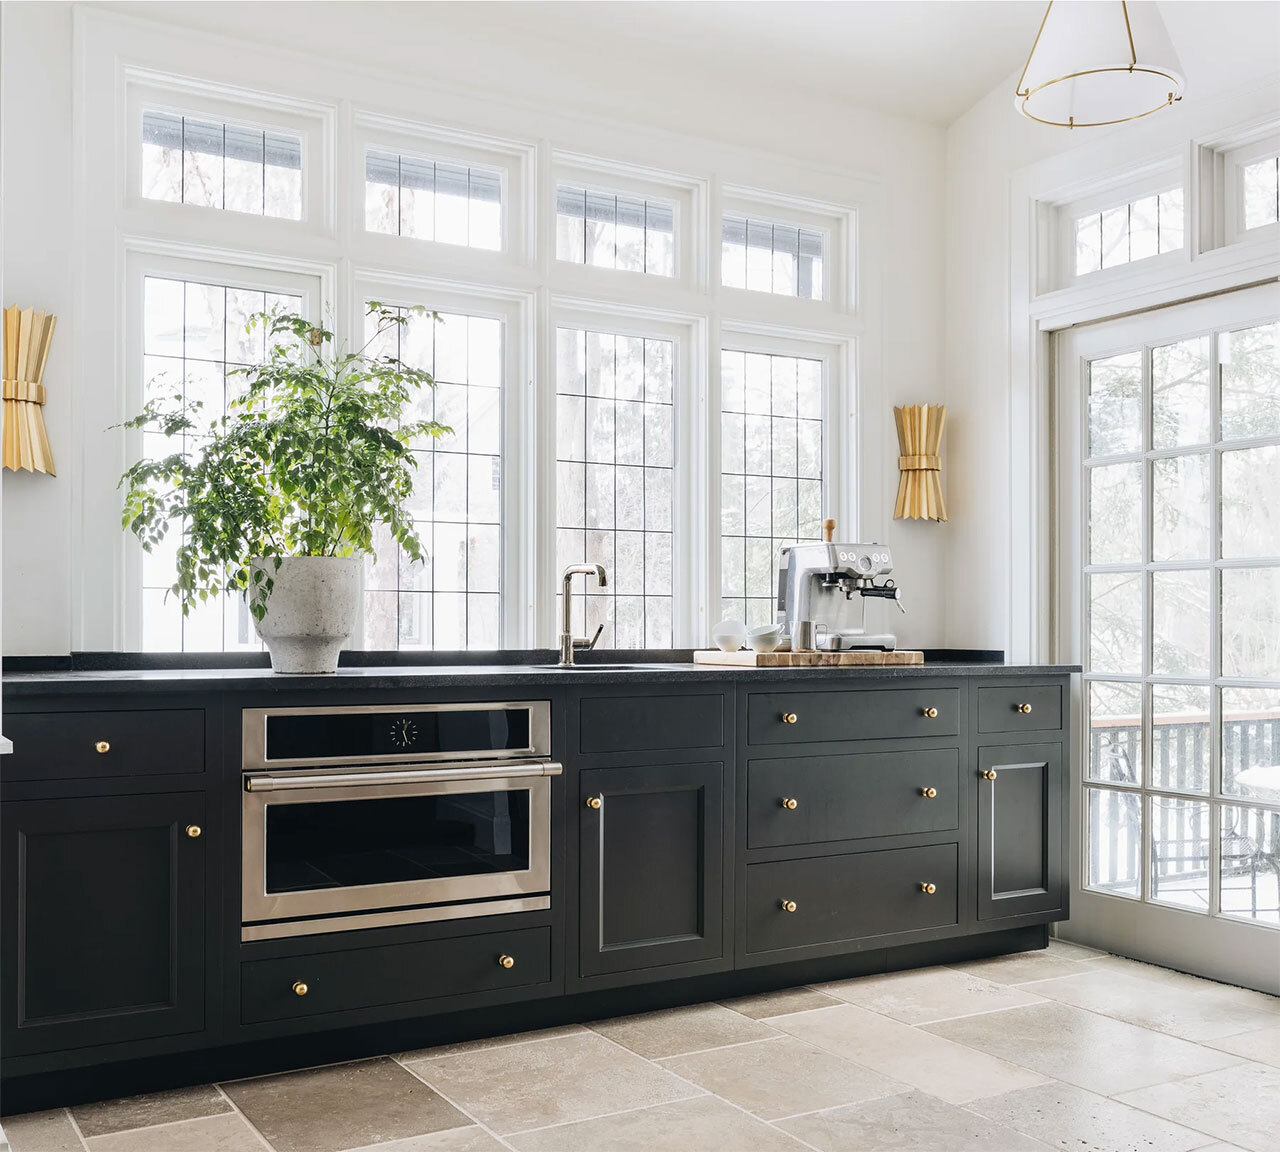 Discover Which Monogram Appliance Collection Caters to Your Palate